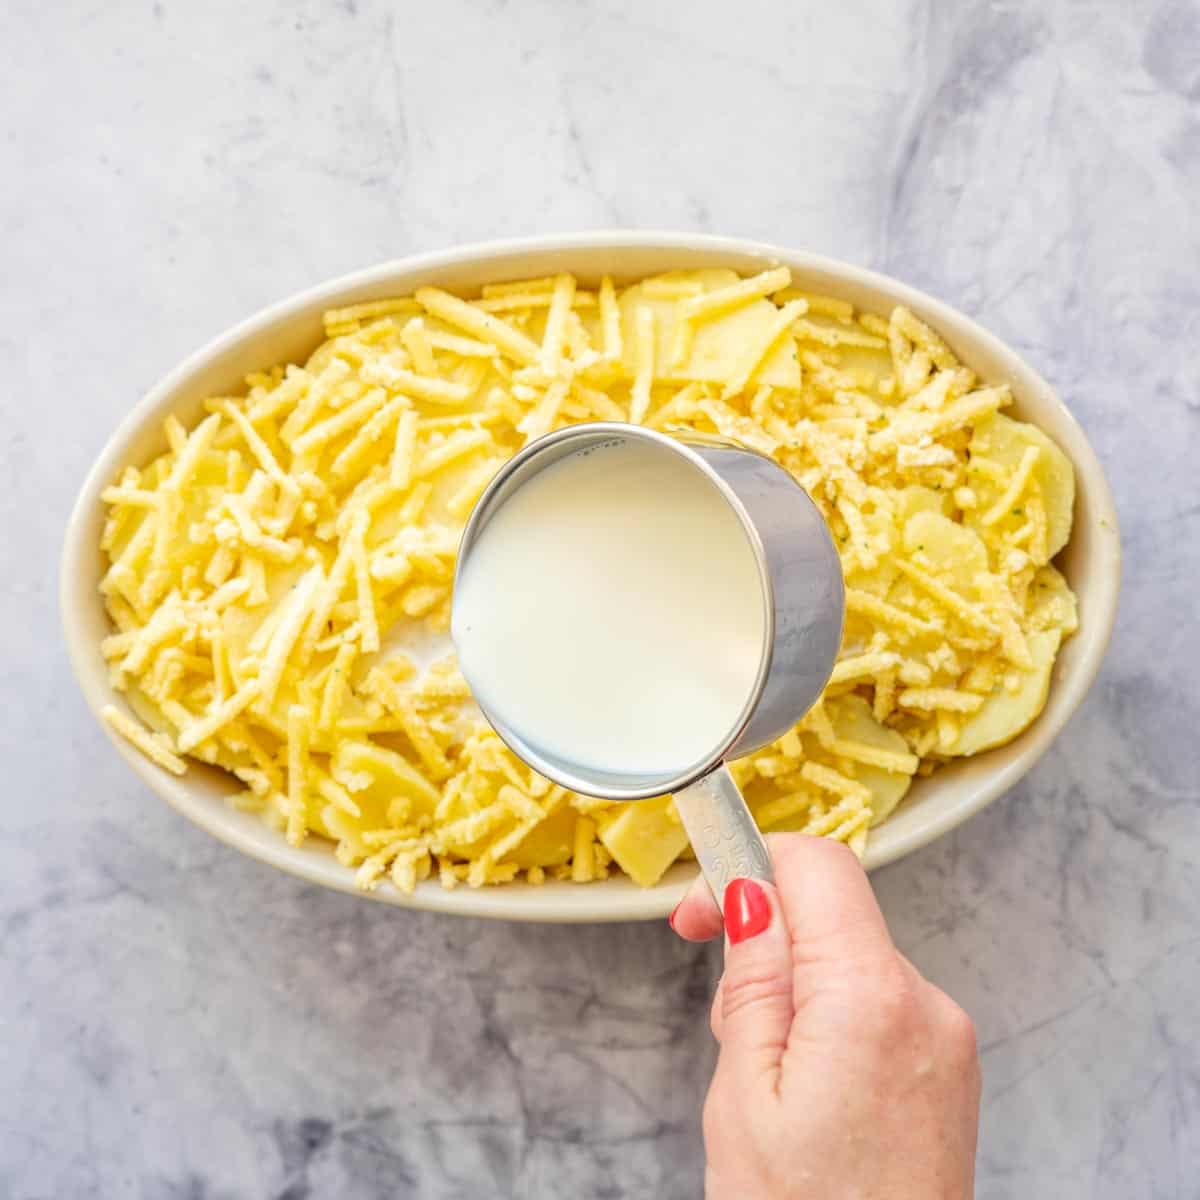 A measuring cup of milk being poured over a baking dish of potatoes and cheese.